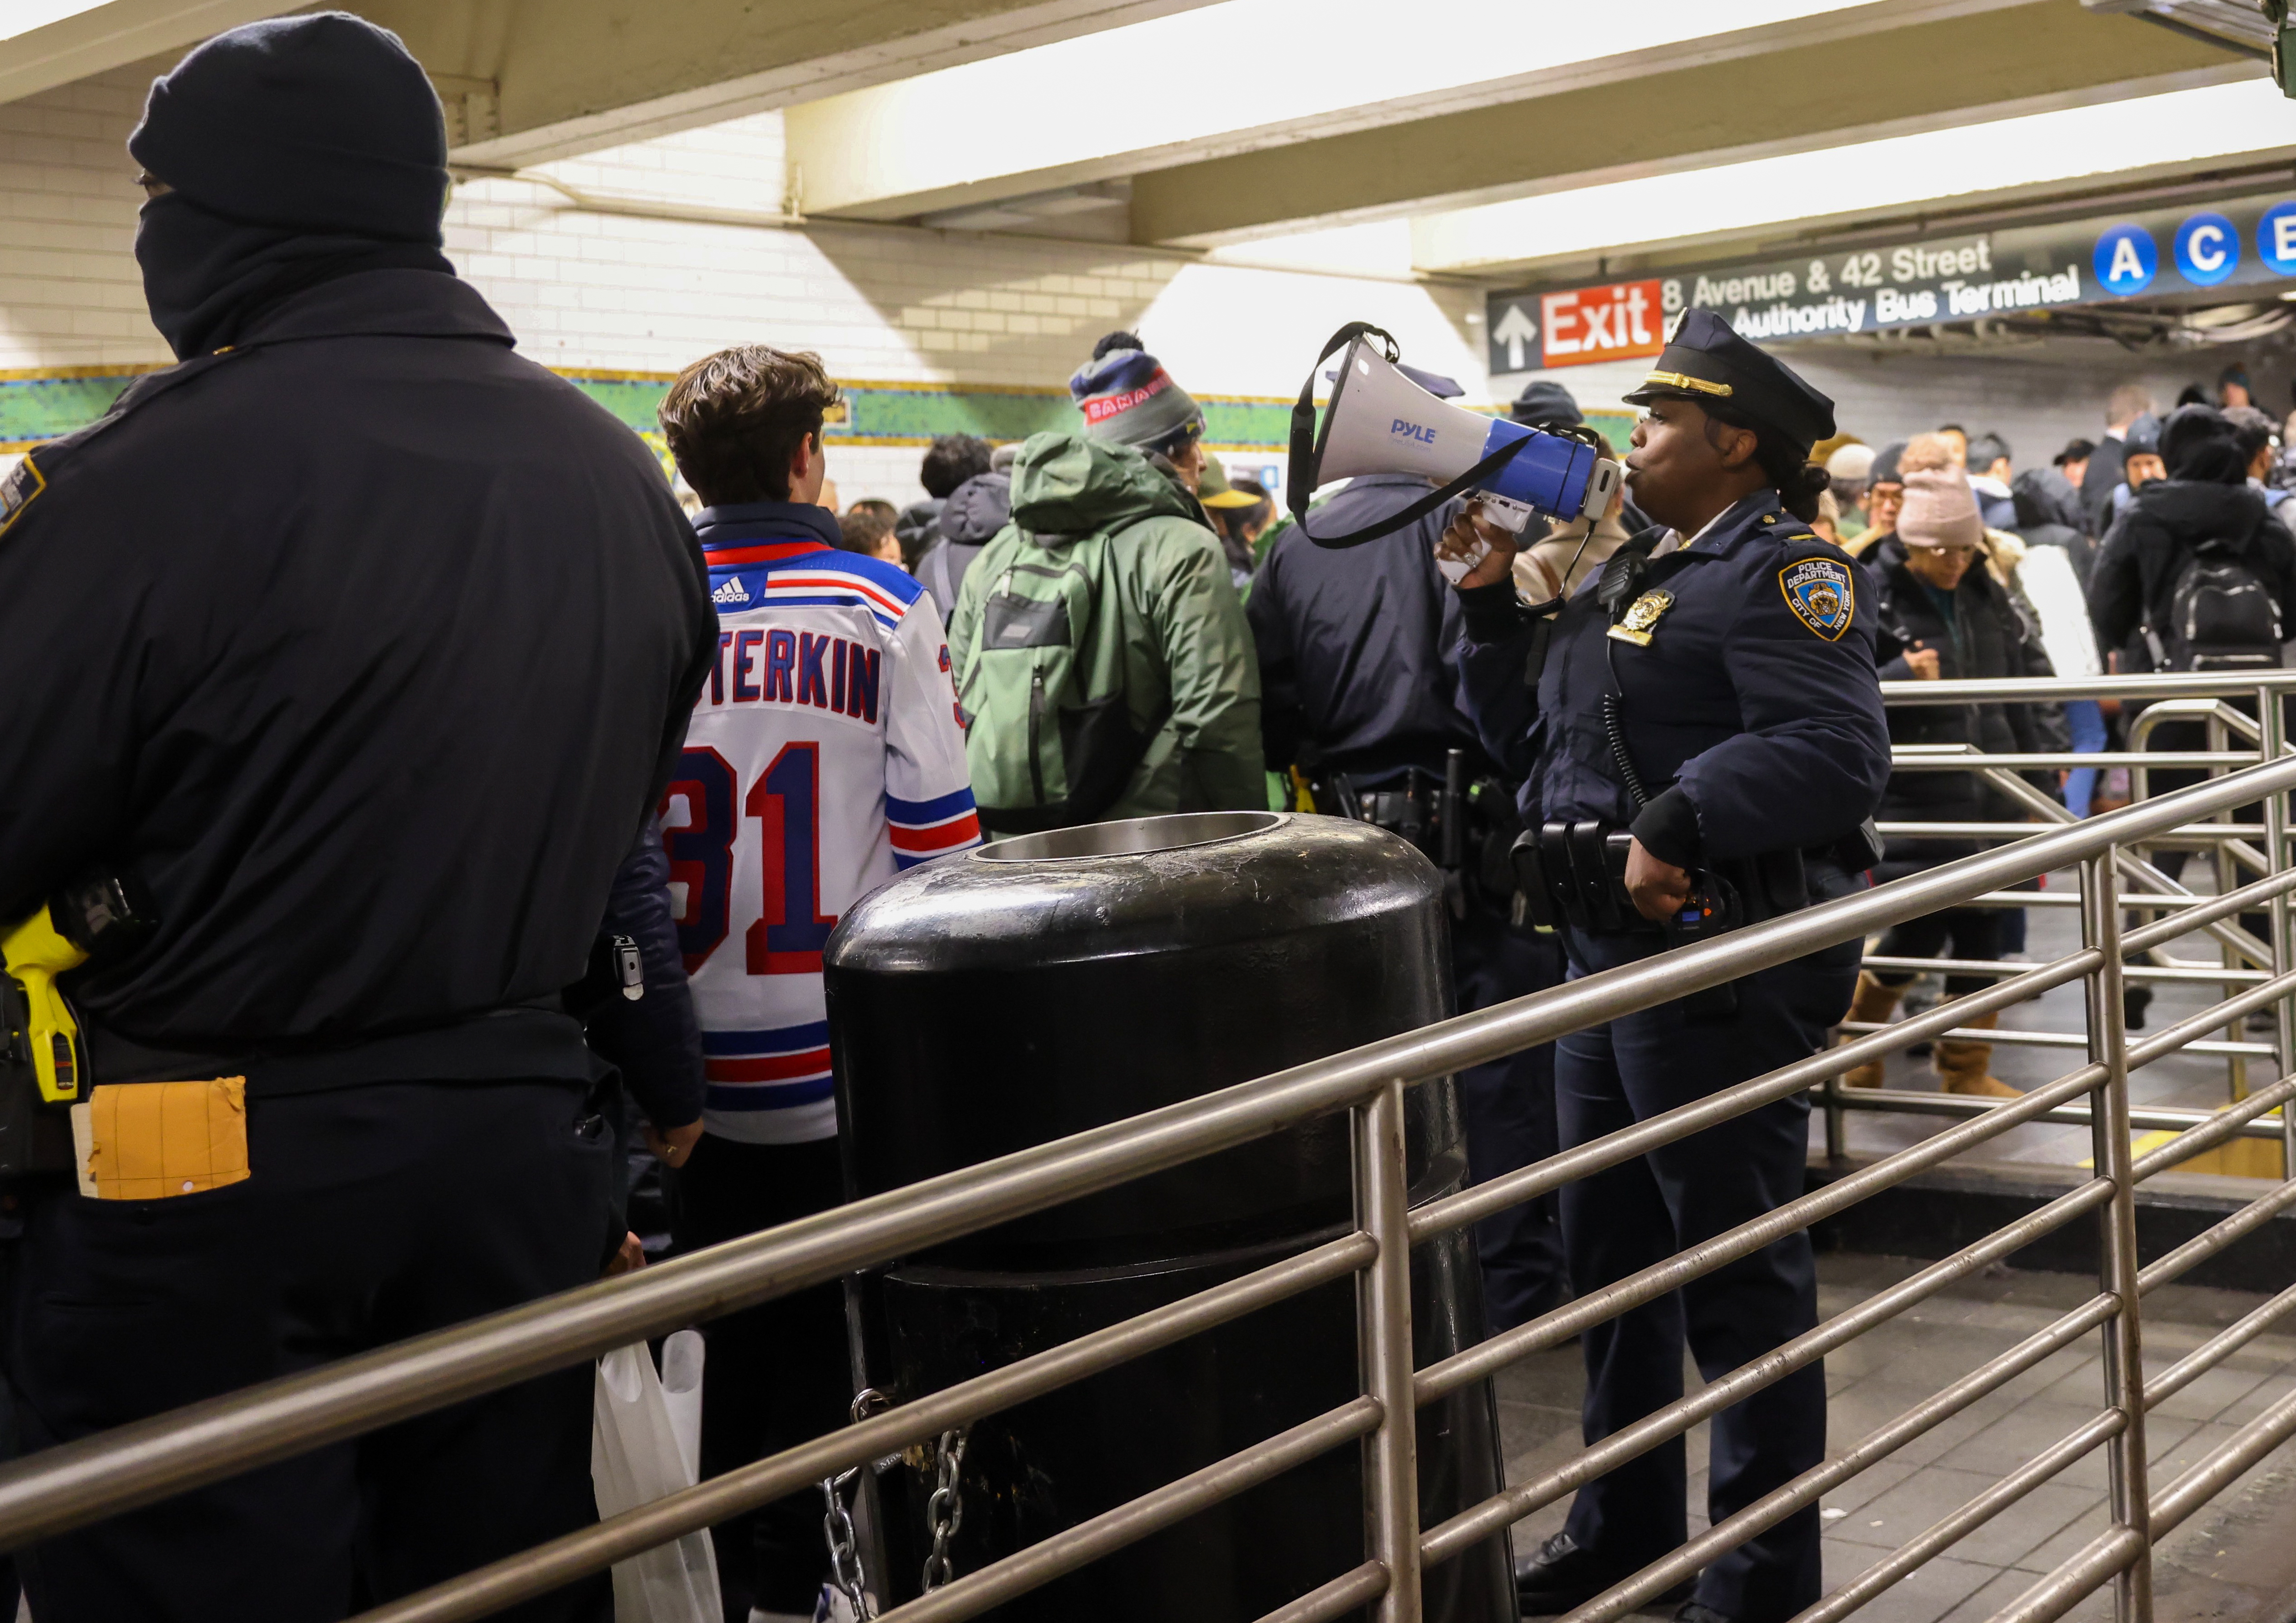 A stock image of police in a crowded subway station